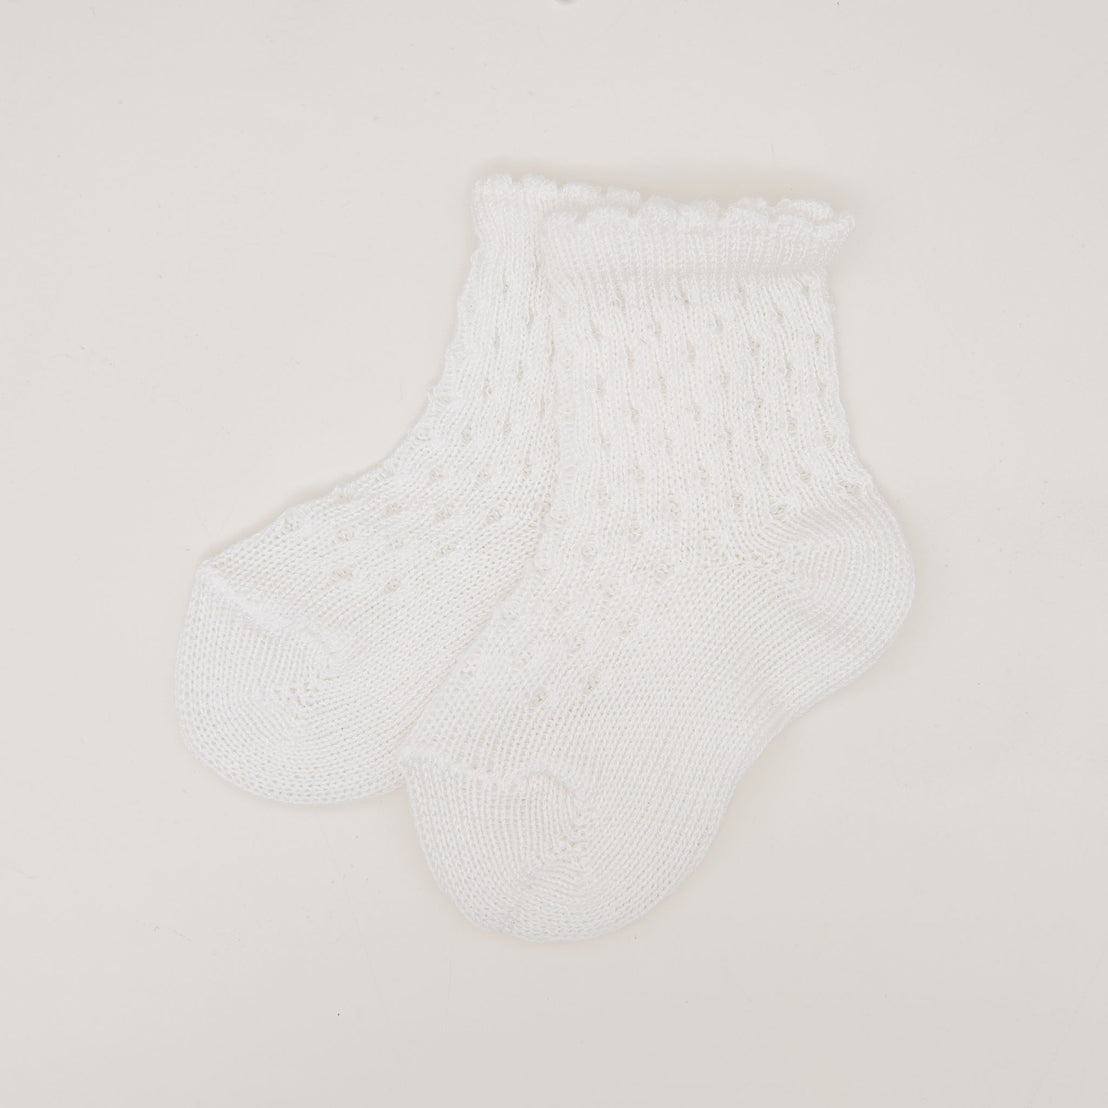 A pair of Scallop Edge Crochet Socks with a knit pattern, displayed on a plain white background.